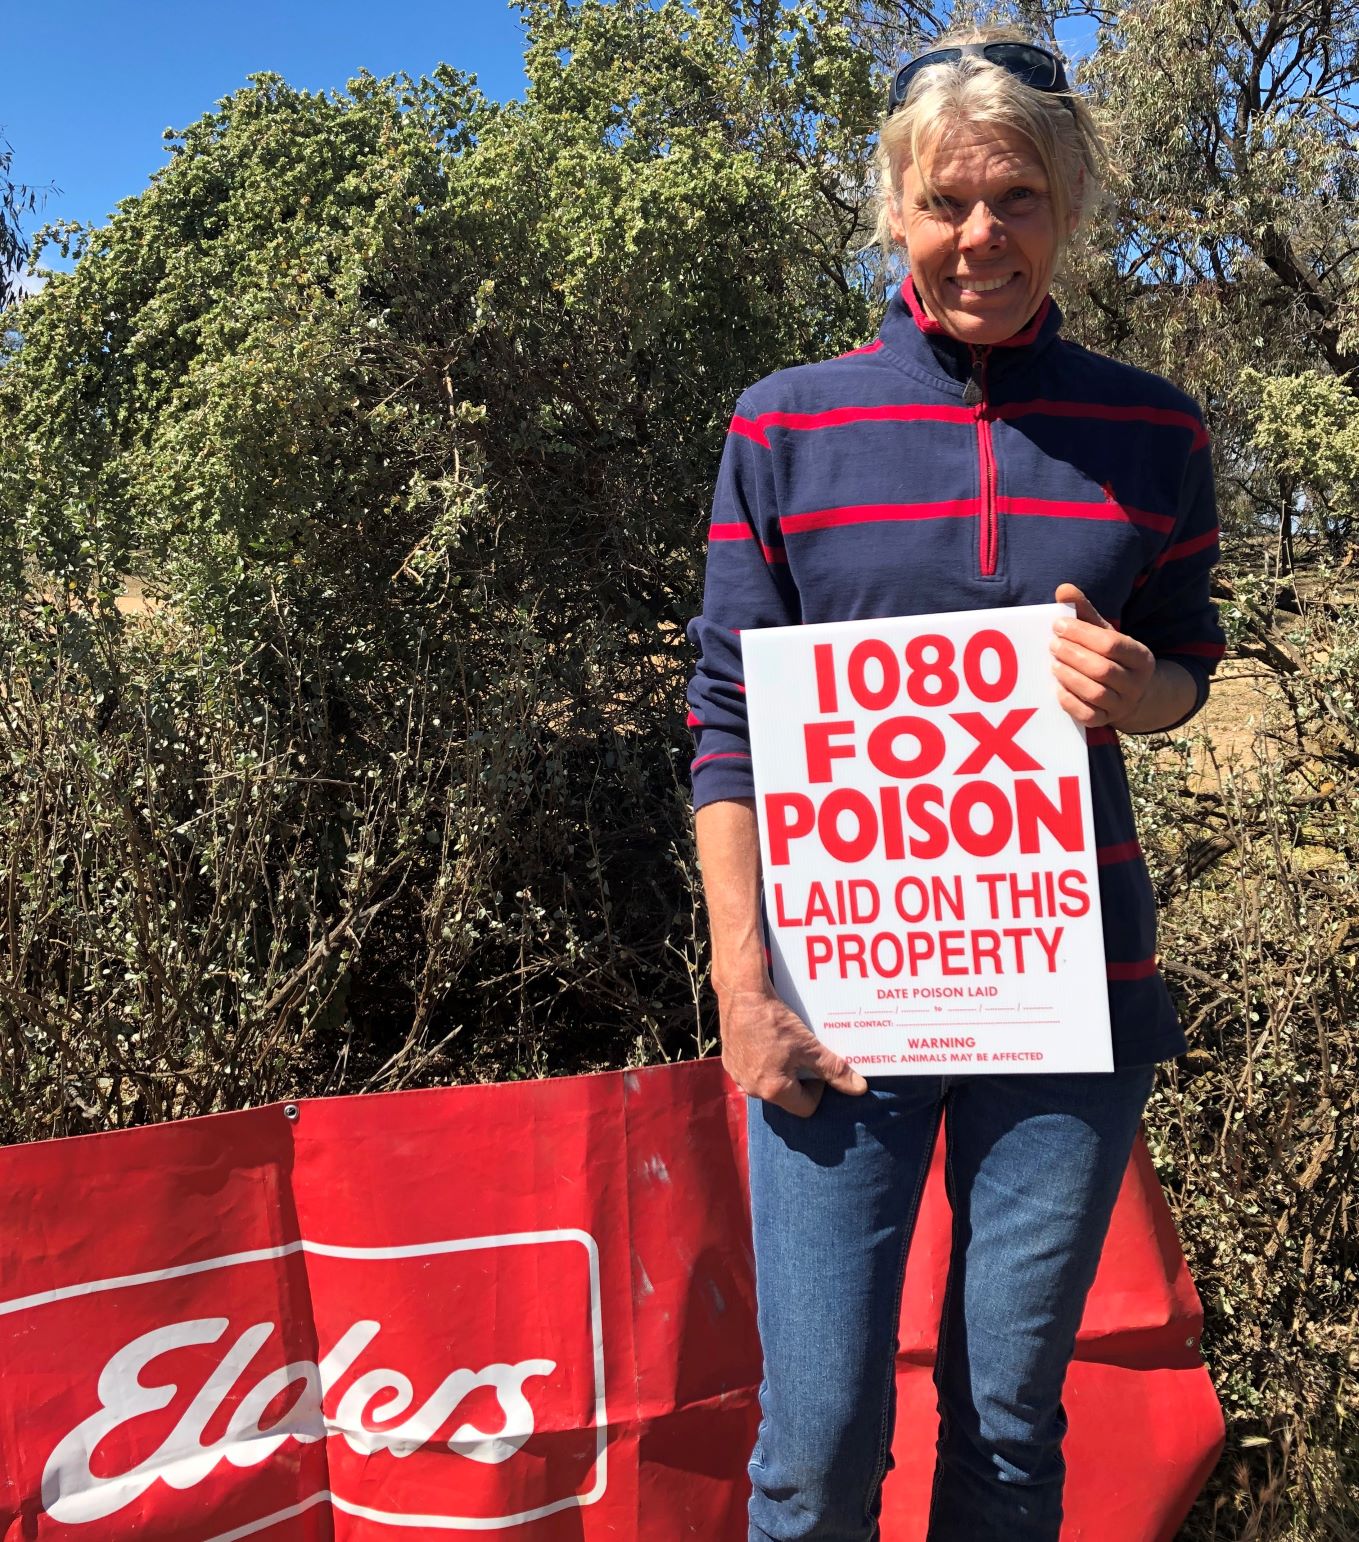 Landholder Ebba Holschier on her farm with a fox baiting sign and banner from Elders, her supplier of choice for the prize.